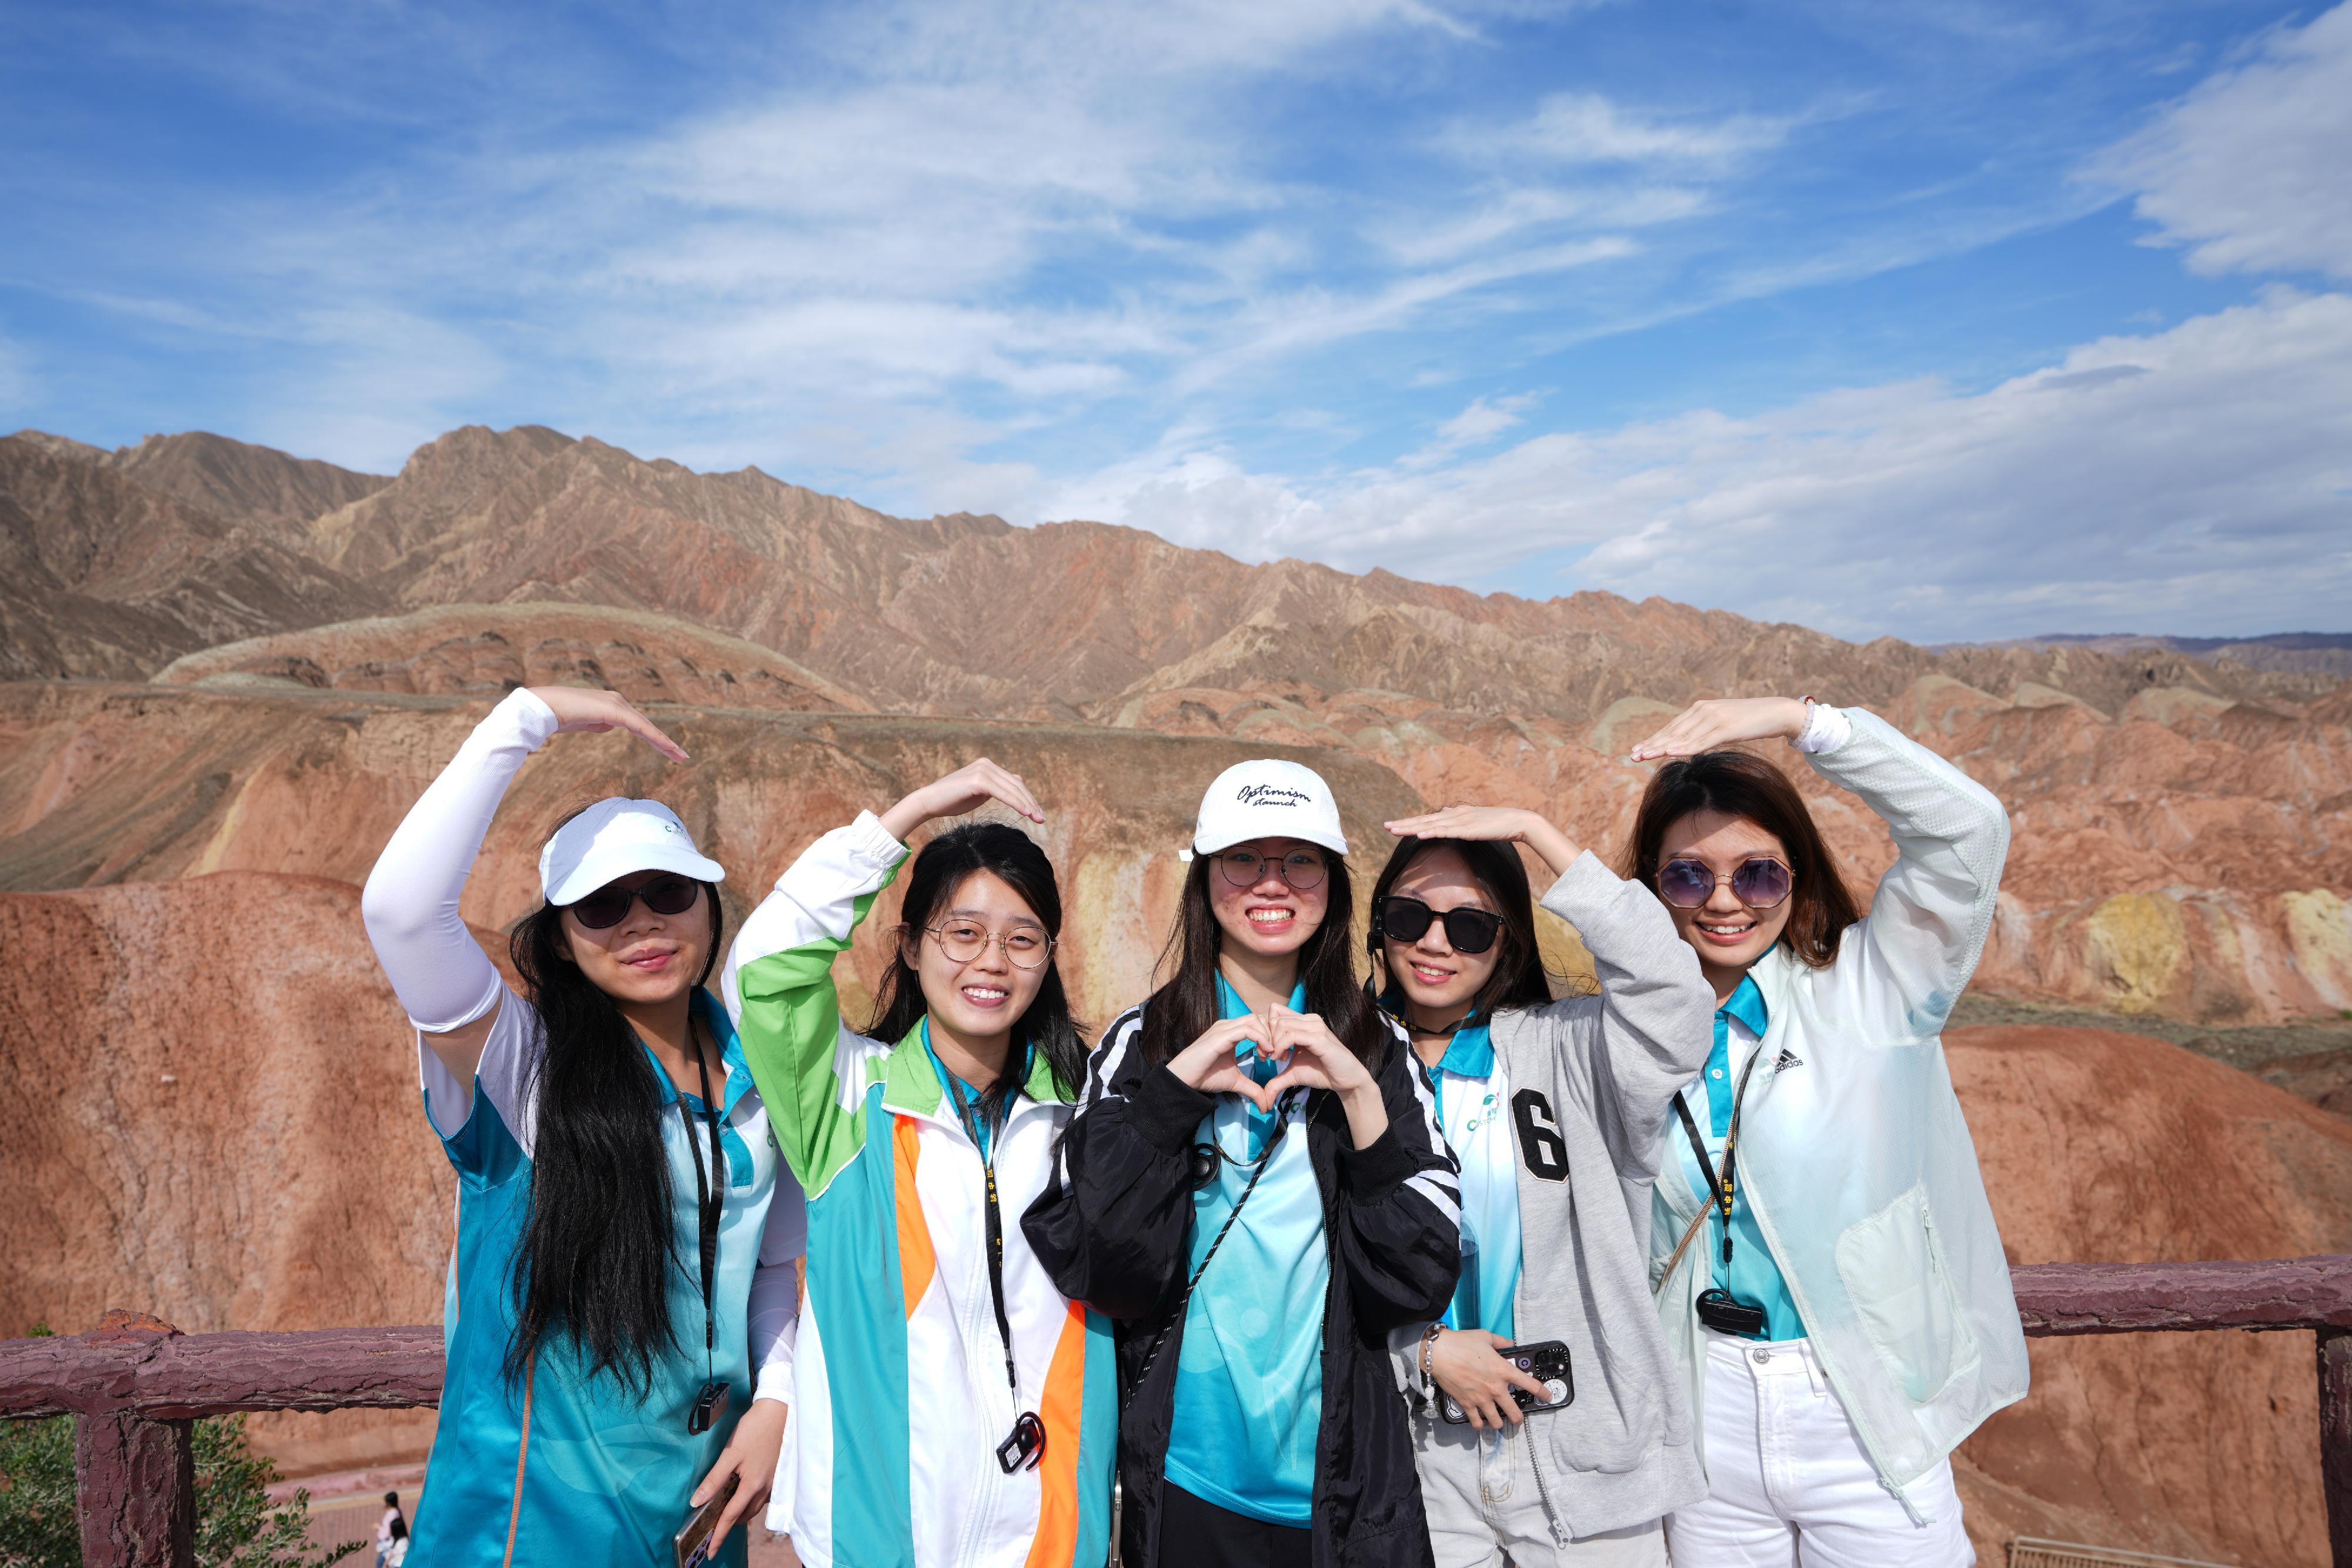 Members of “Customs YES” visited the Danxia National Geopark to appreciate the national natural wonders on July 13.